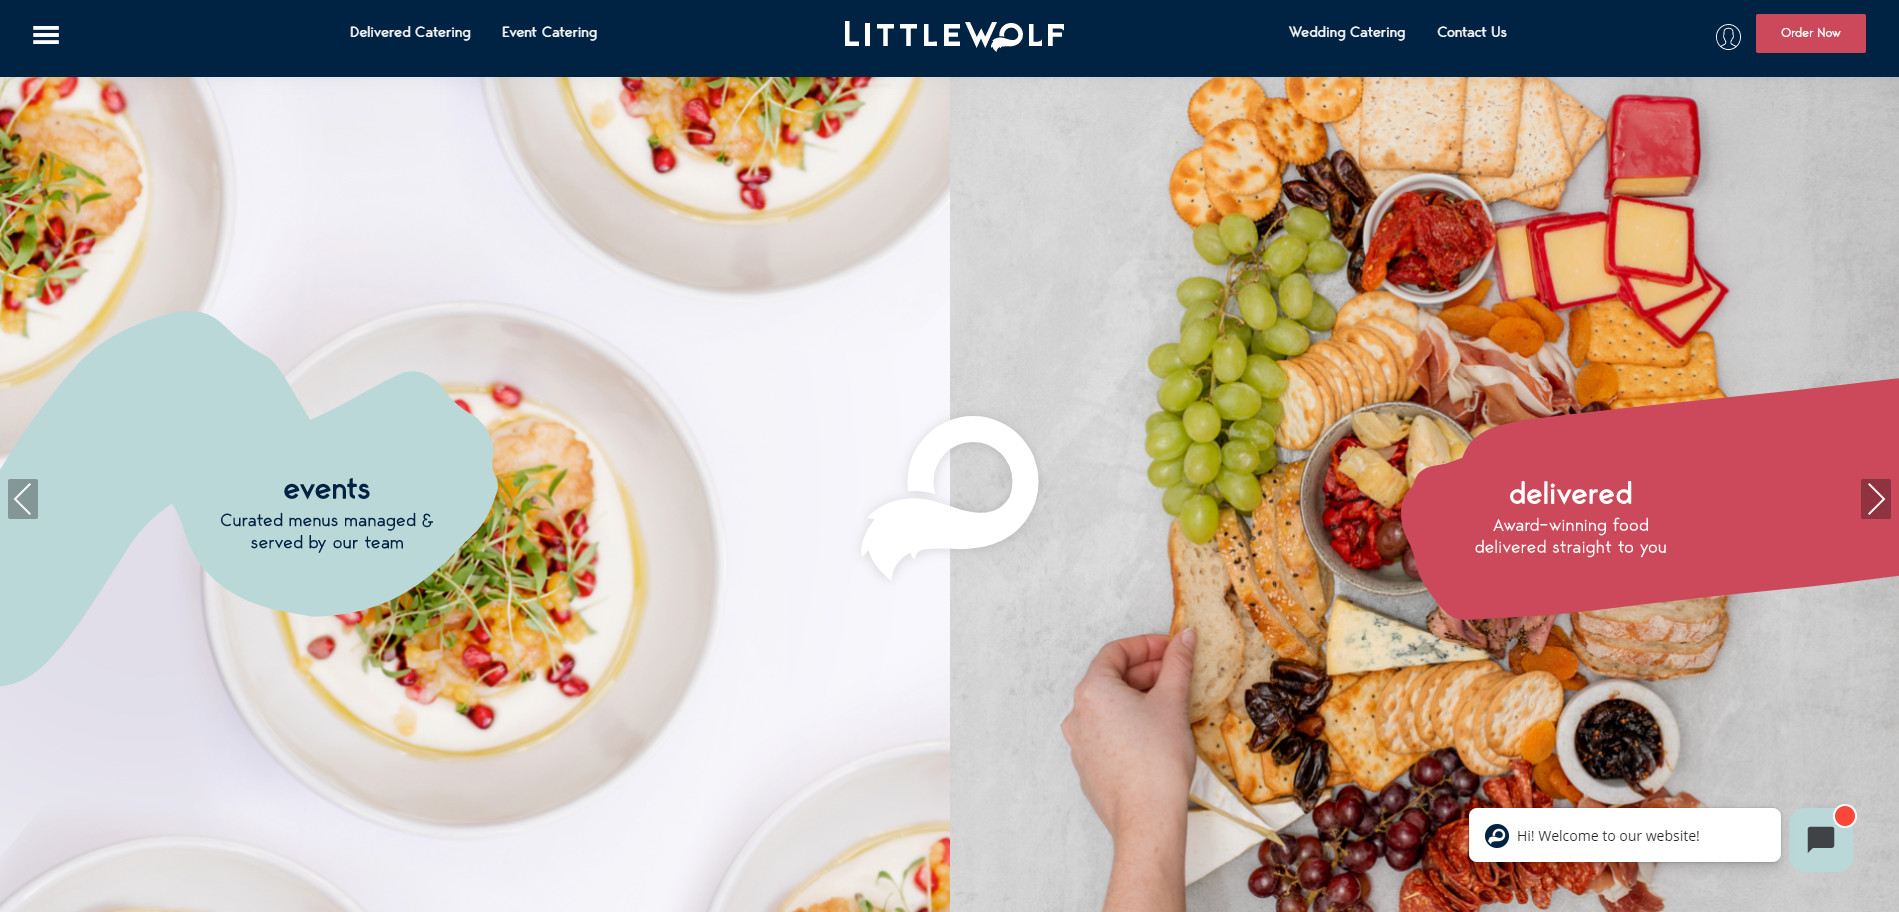  best catering websites example Little Wolf